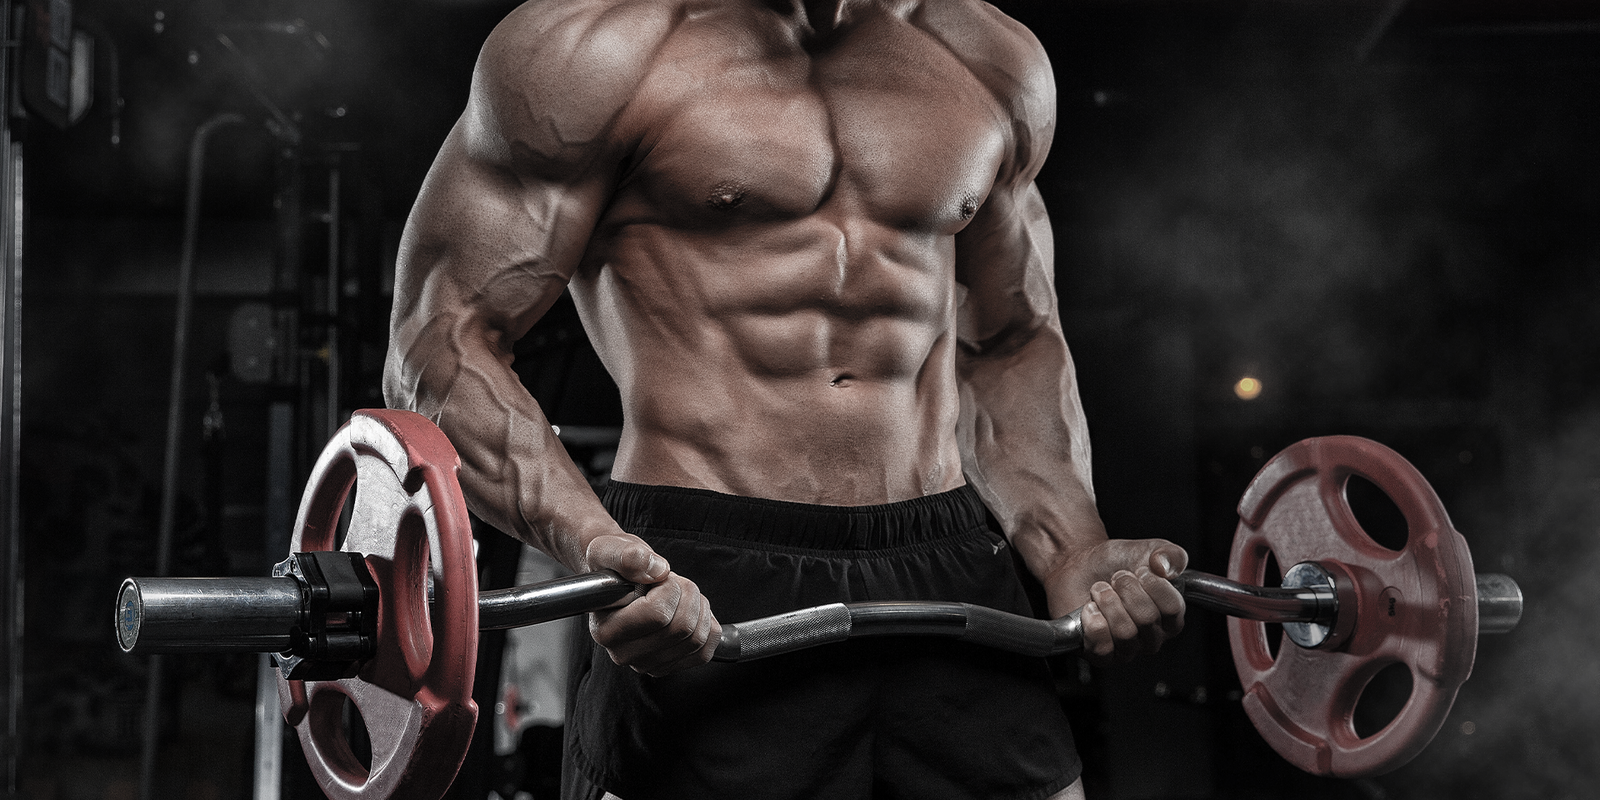 How to increase testosterone levels quickly